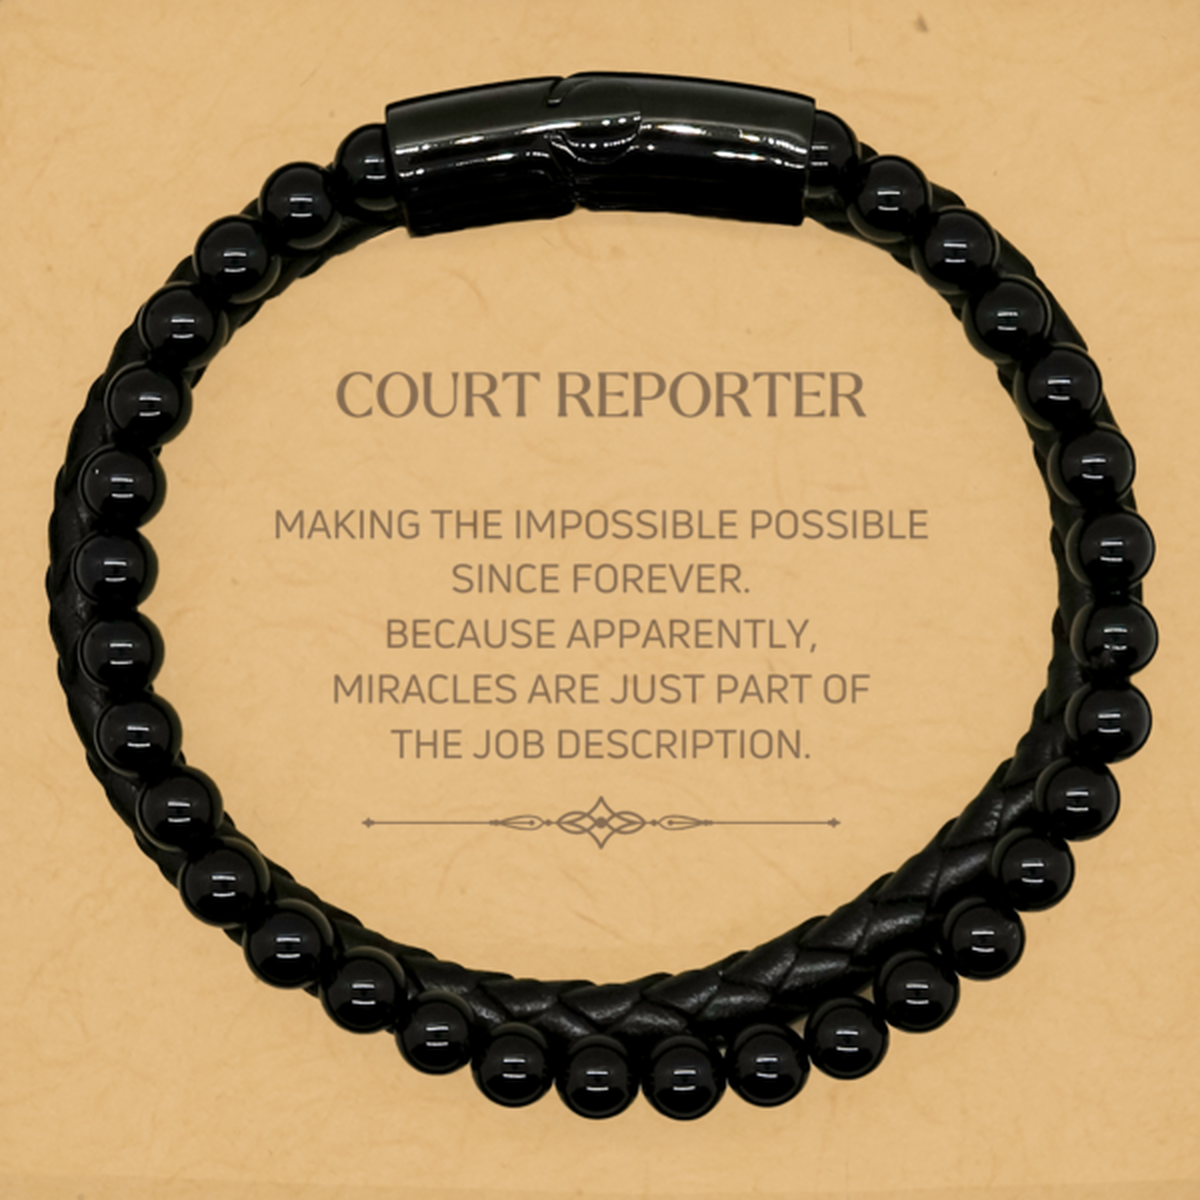 Funny Court Reporter Gifts, Miracles are just part of the job description, Inspirational Birthday Stone Leather Bracelets For Court Reporter, Men, Women, Coworkers, Friends, Boss